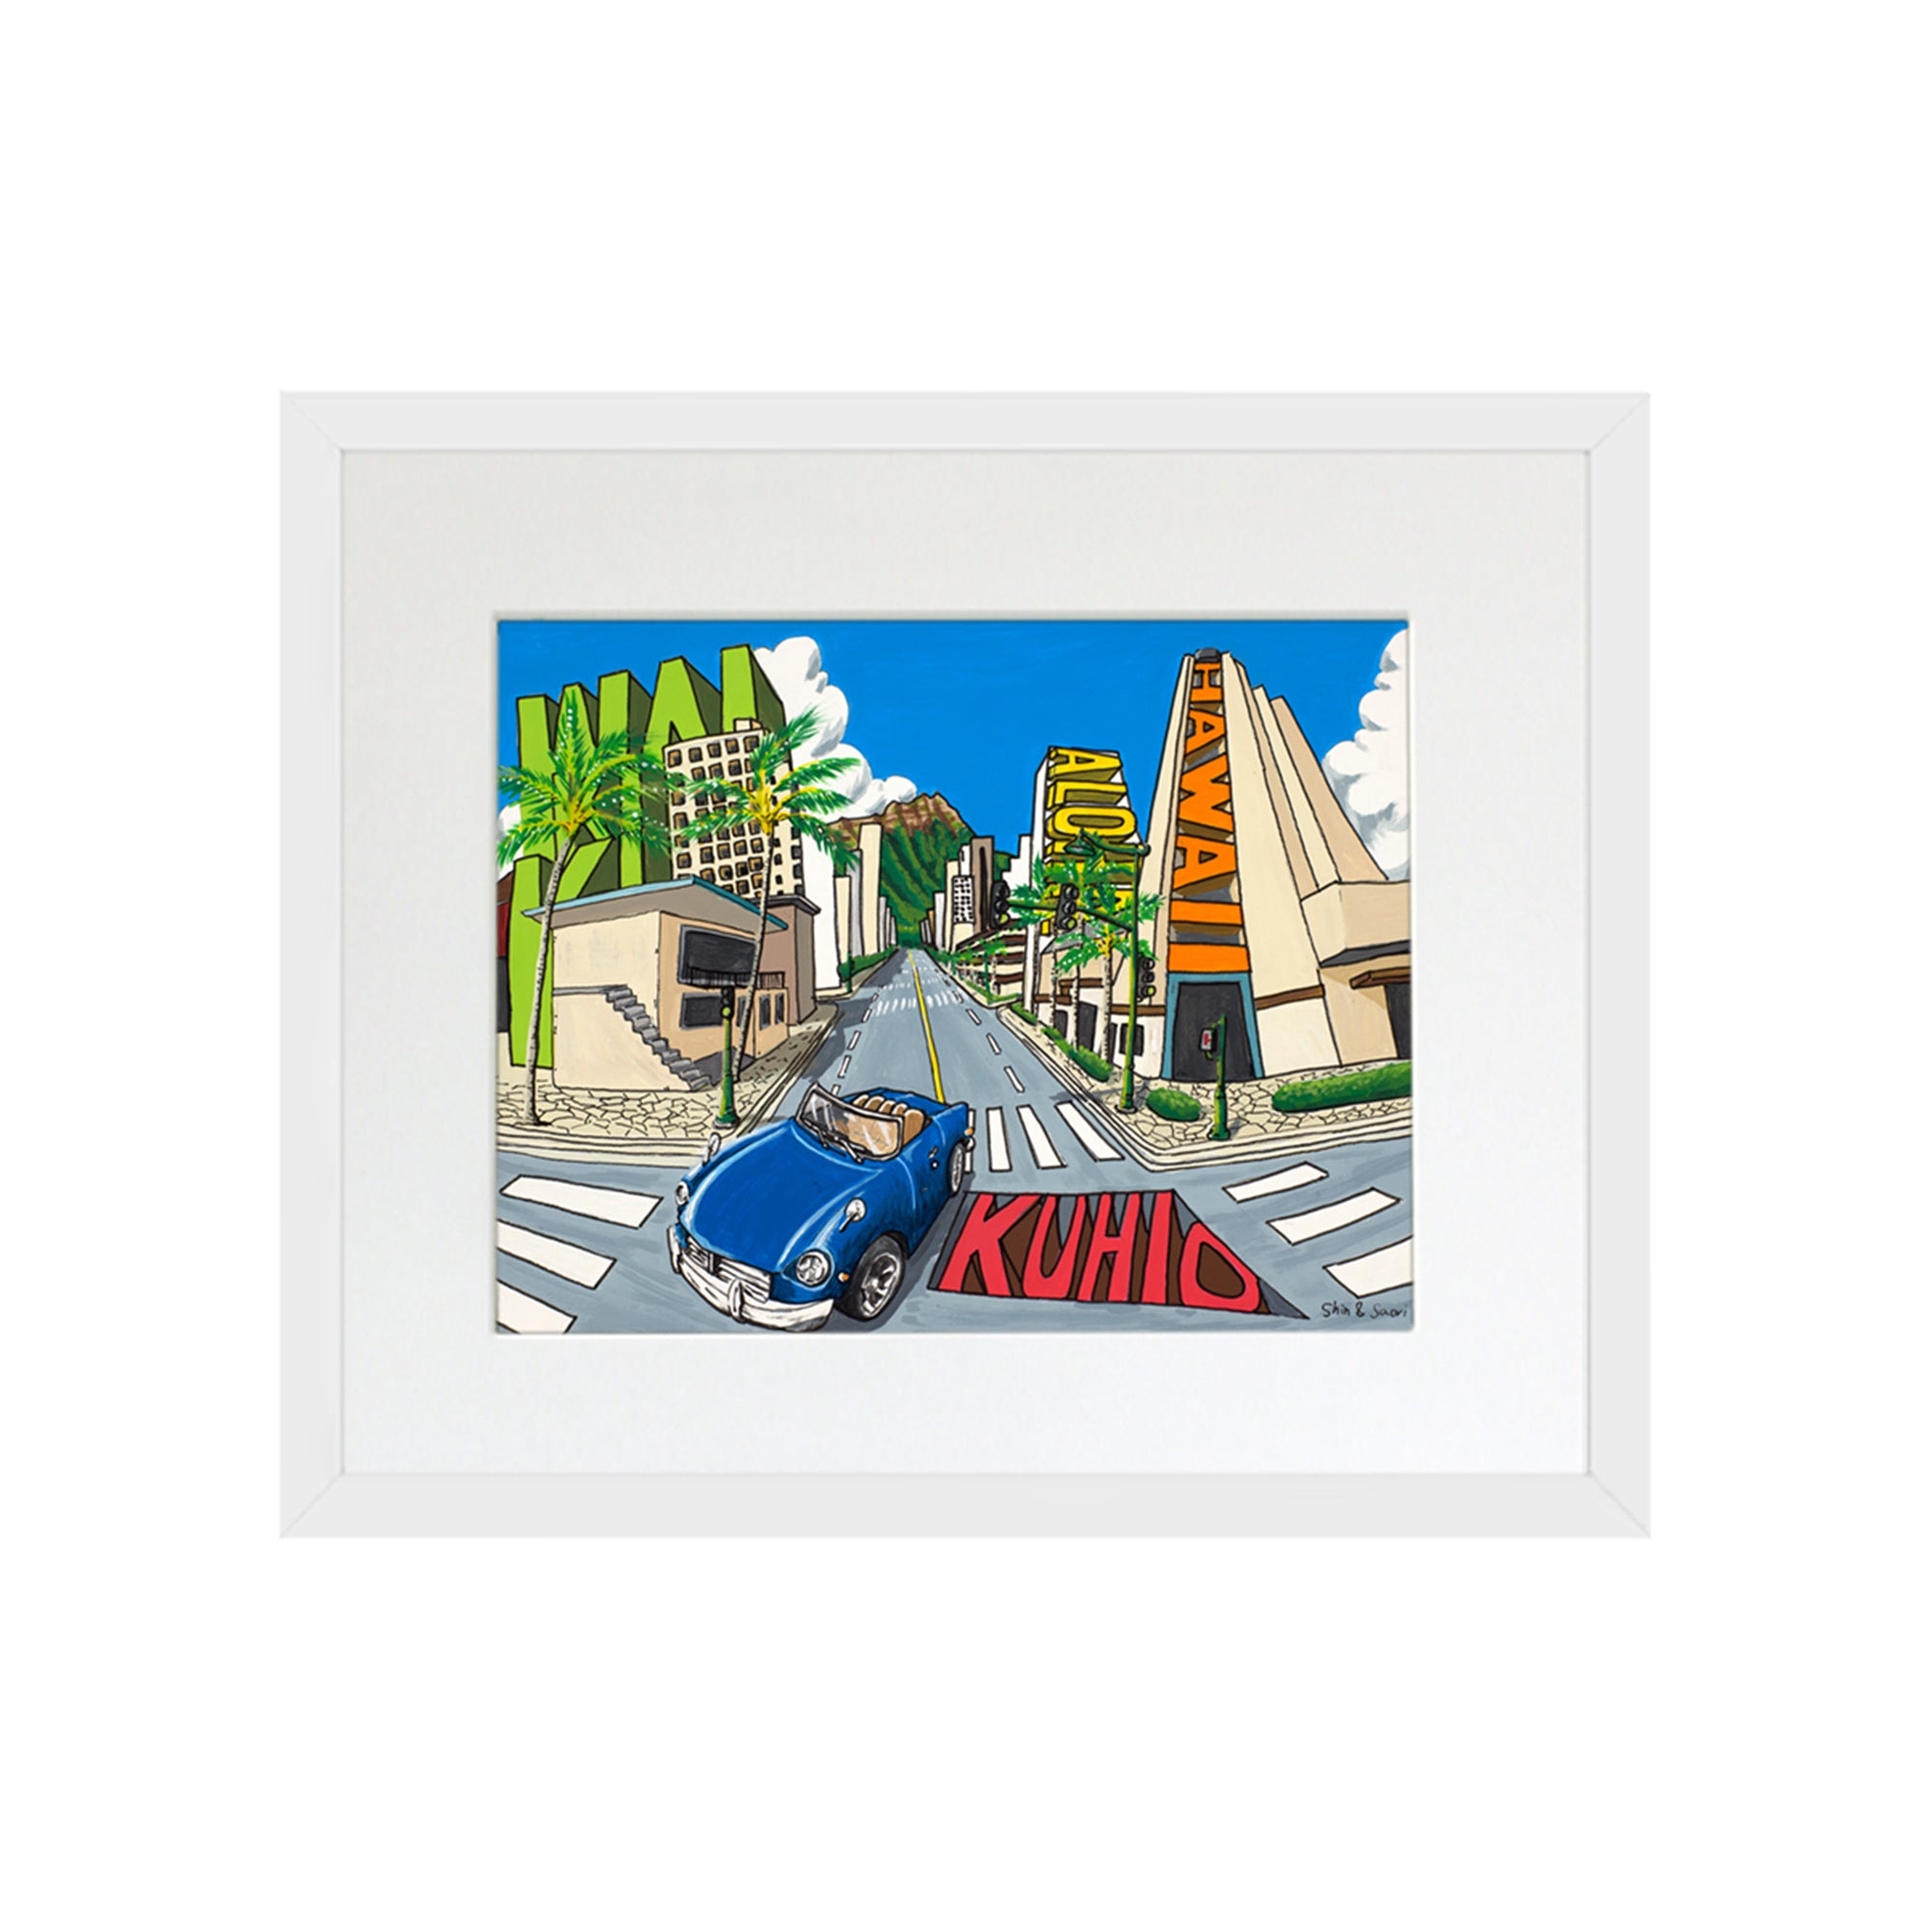 A colorful graphic depiction of Kuhio Avenue by Hawaii artist Shin Kato